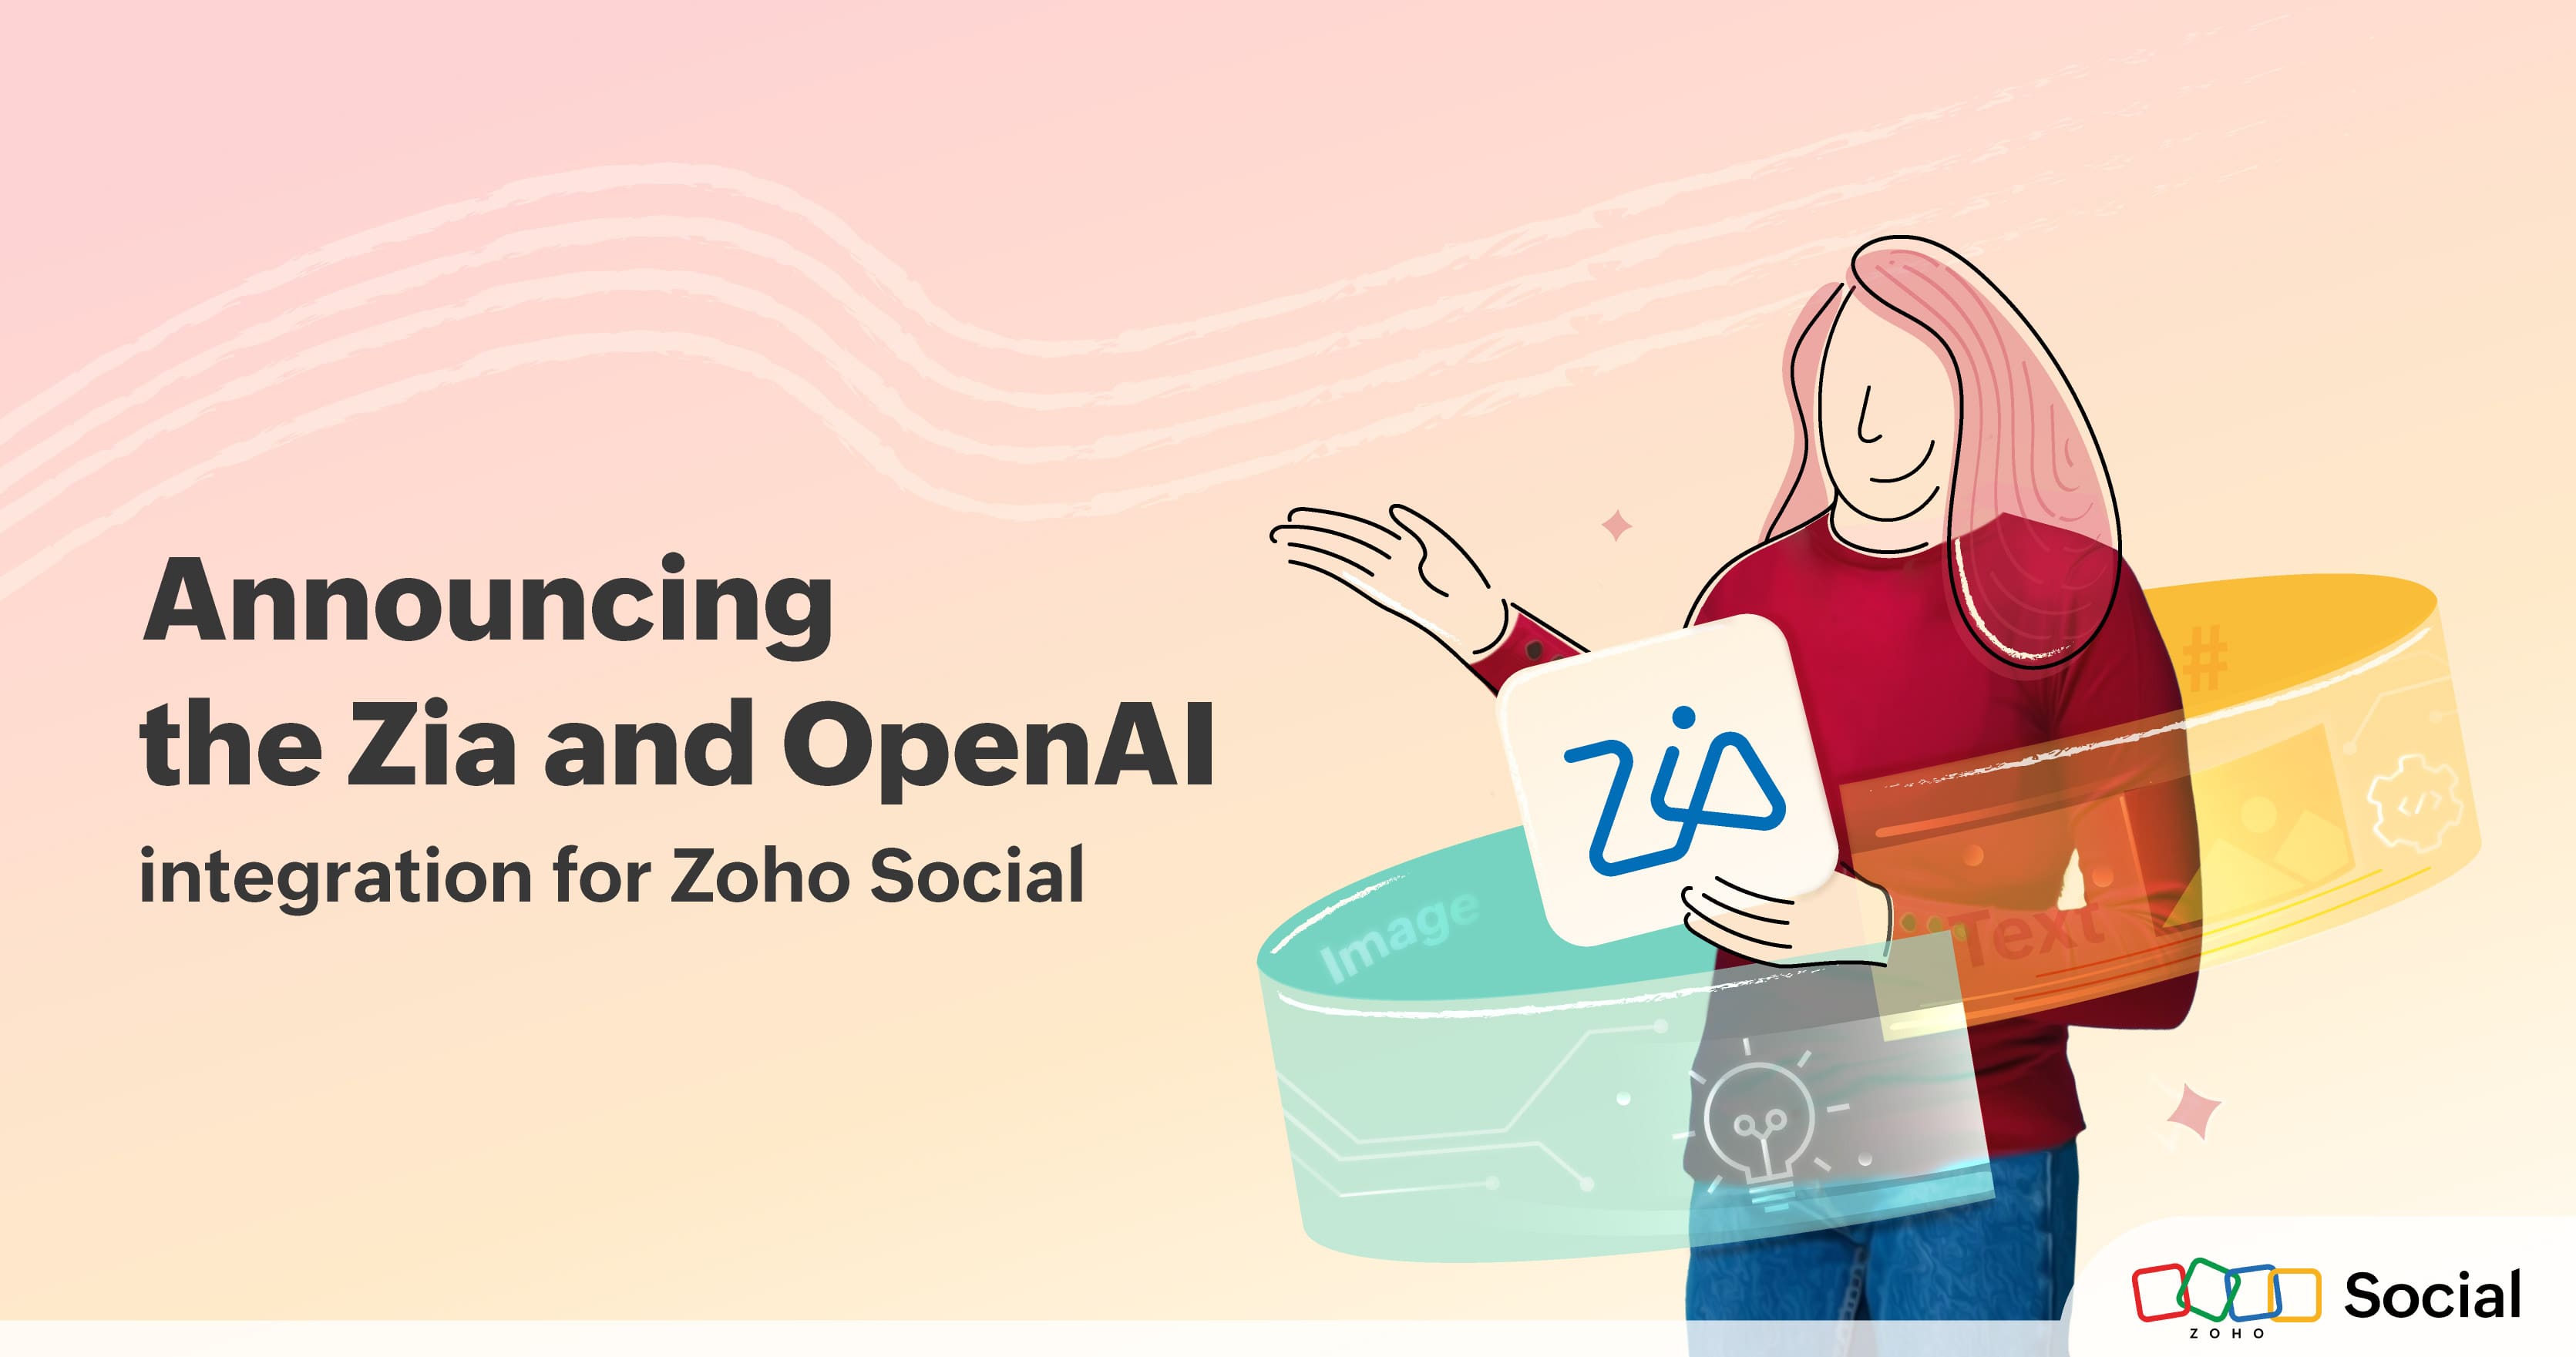 Announcing the Zia and OpenAI integration for Zoho Social